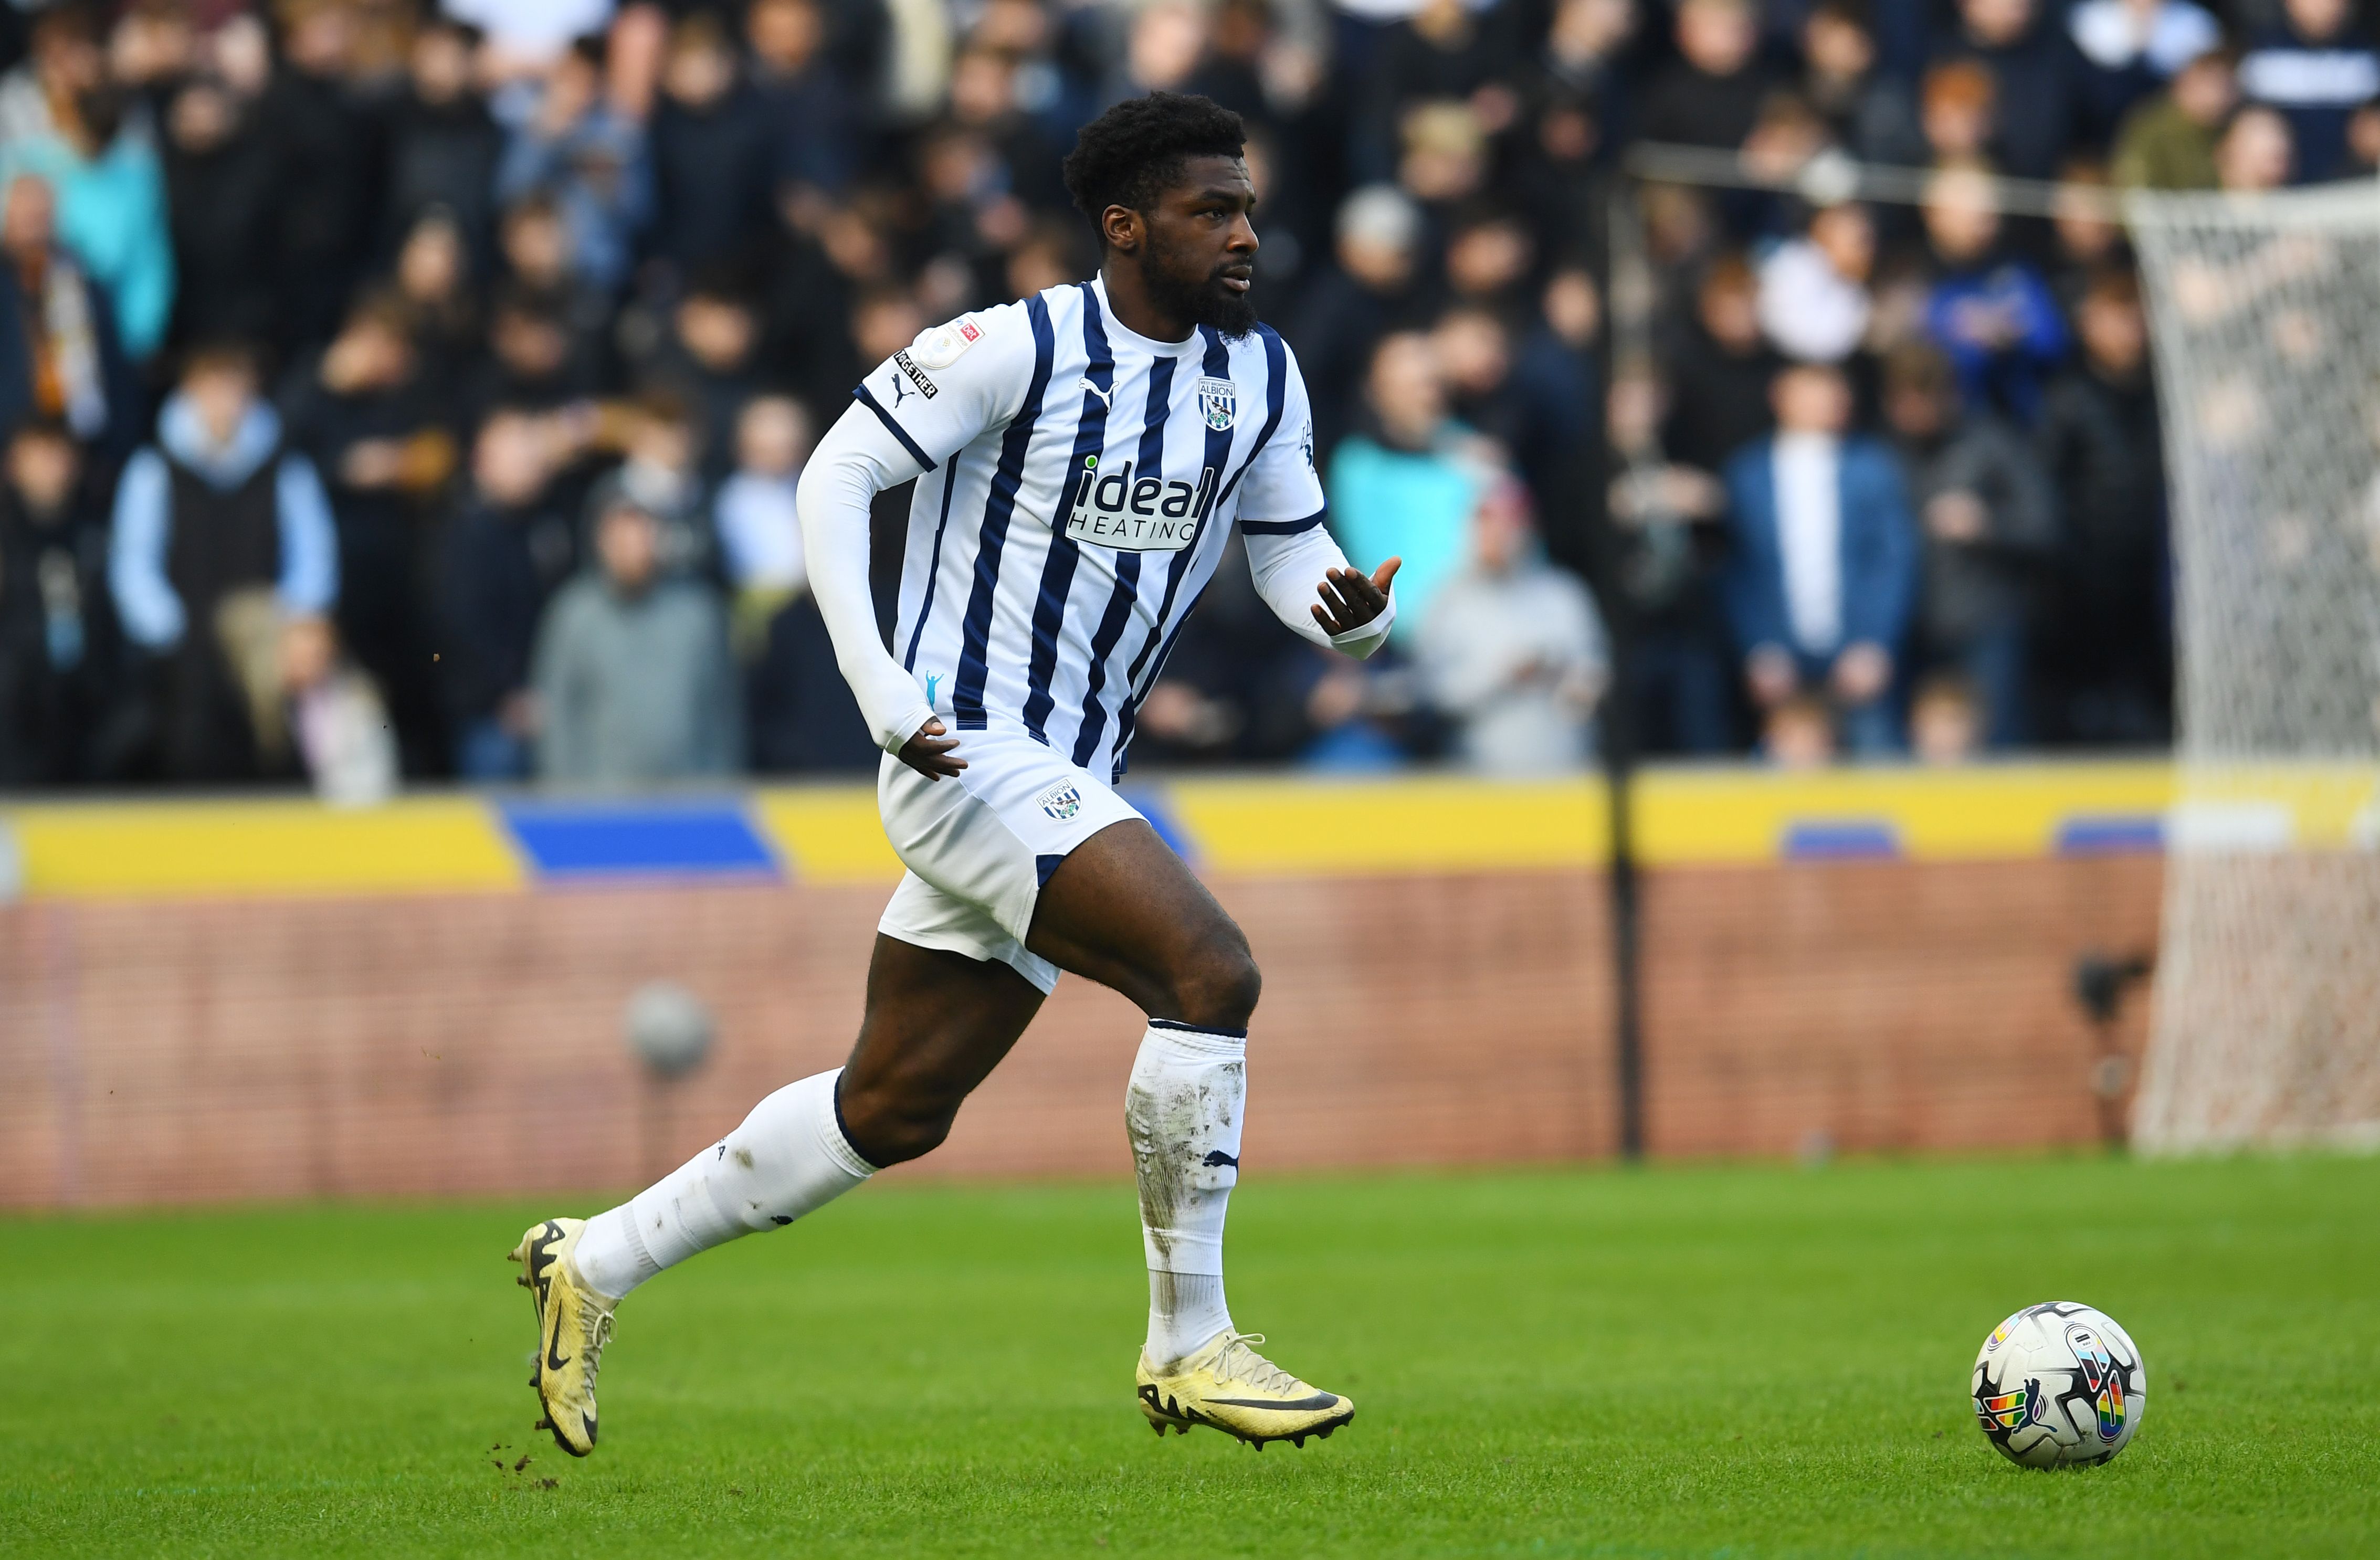 Cedric Kipre in action for Albion wearing the home kit 